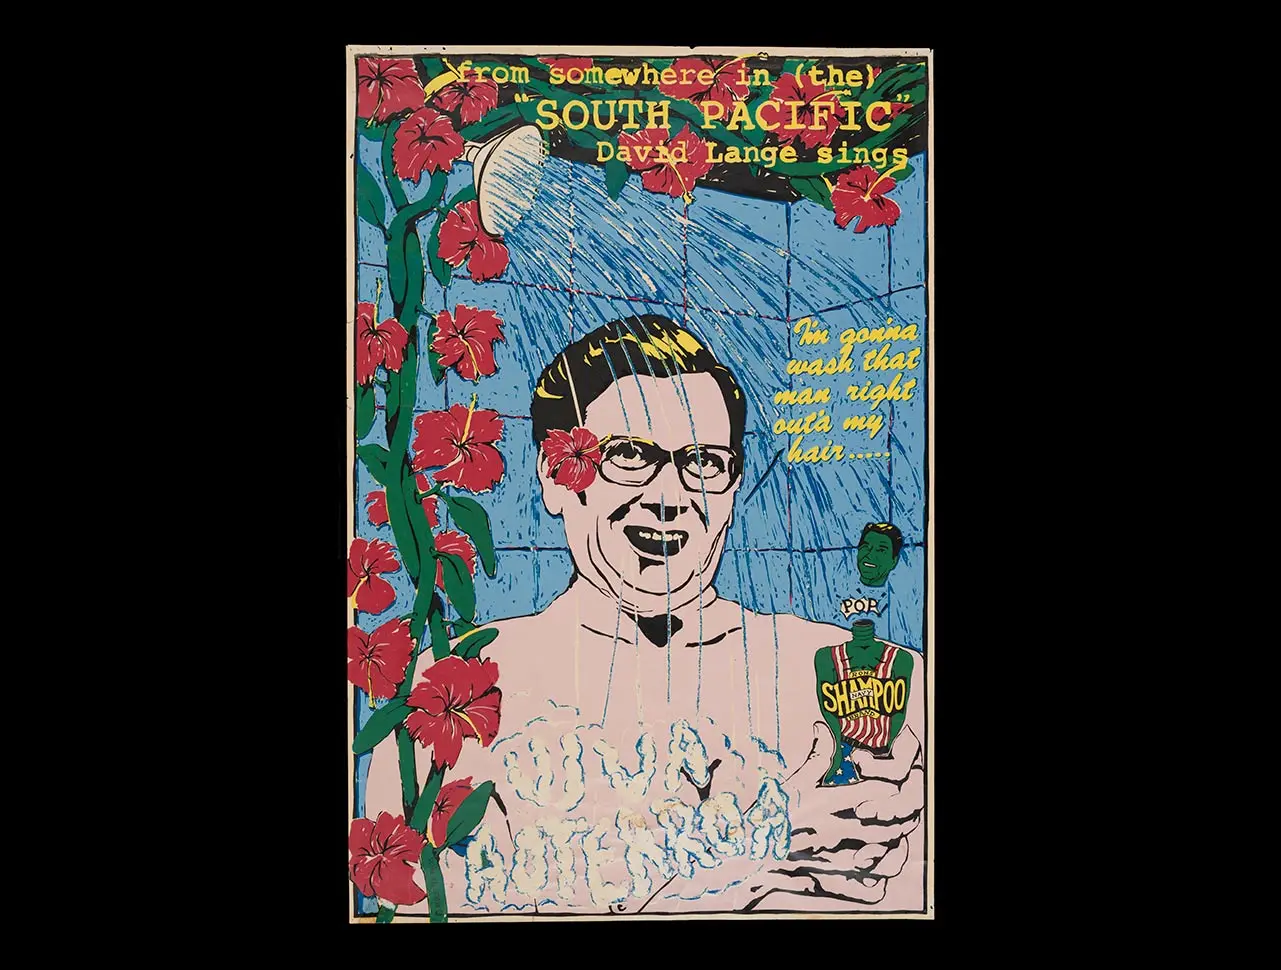 Satirical anti-nuclear poster. It shows former Aotearoa NZ prime minister David Lange in the shower — singing the words 'I'm gonna wash that man right outa my hair' while holding a shampoo bottle with Ronald Reagan's head as a cap.